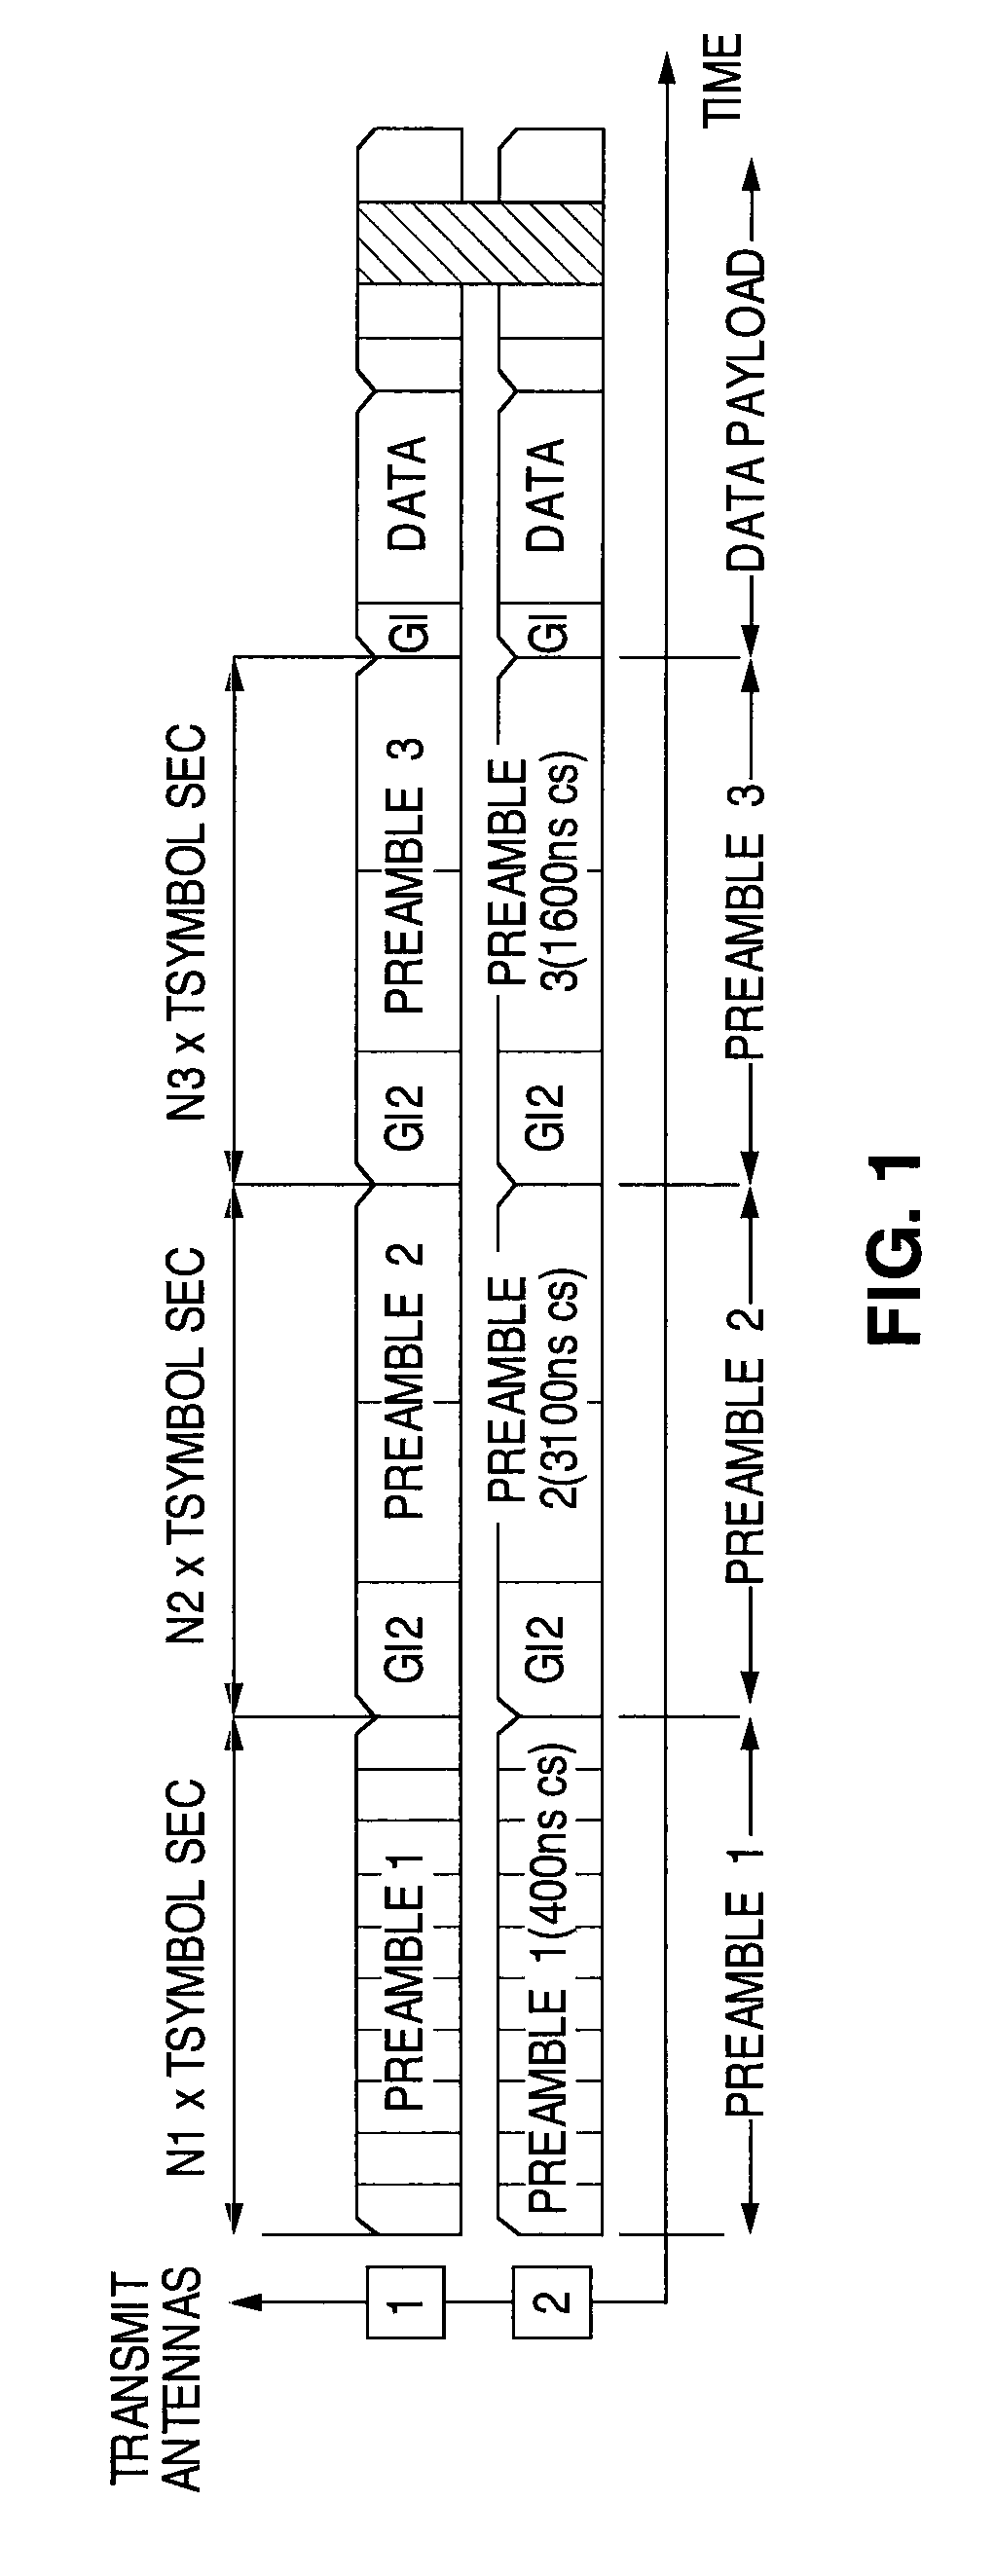 Apparatus and method for simultaneous testing of multiple orthogonal frequency division multiplexed transmitters with single vector signal analyzer